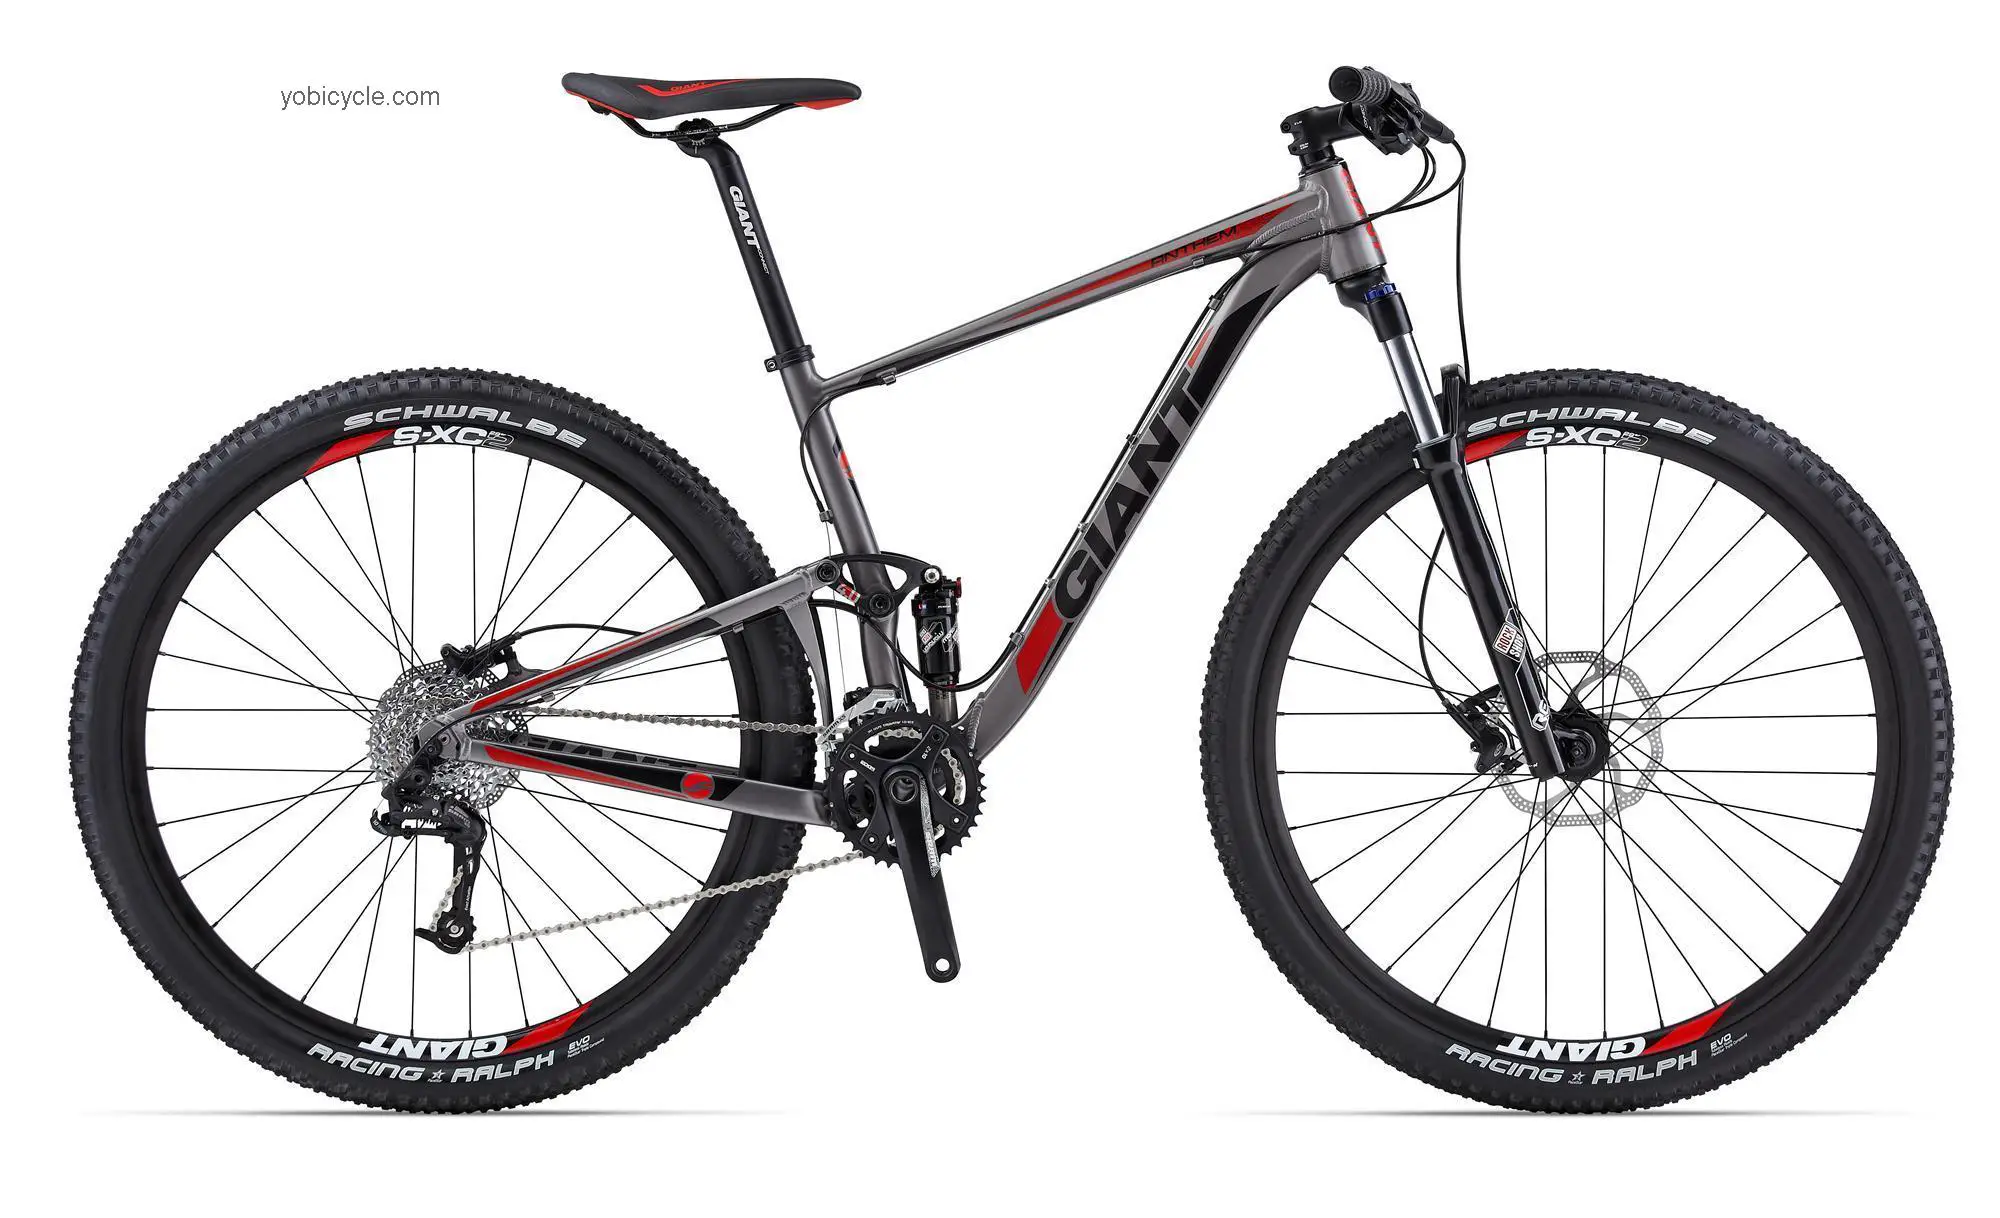 Giant Anthem X 29er 4 2012 comparison online with competitors